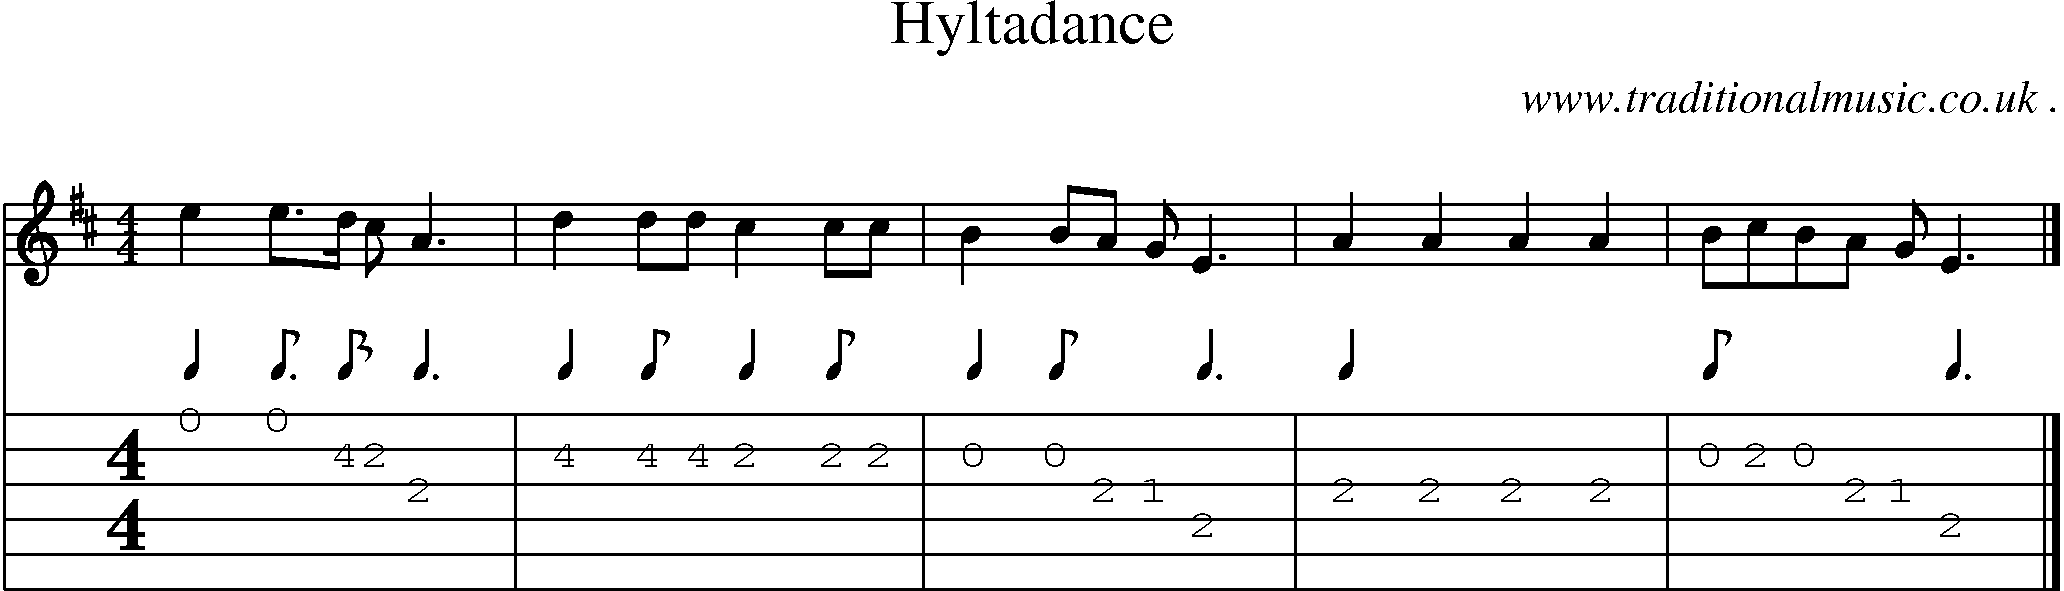 Sheet-music  score, Chords and Guitar Tabs for Hyltadance